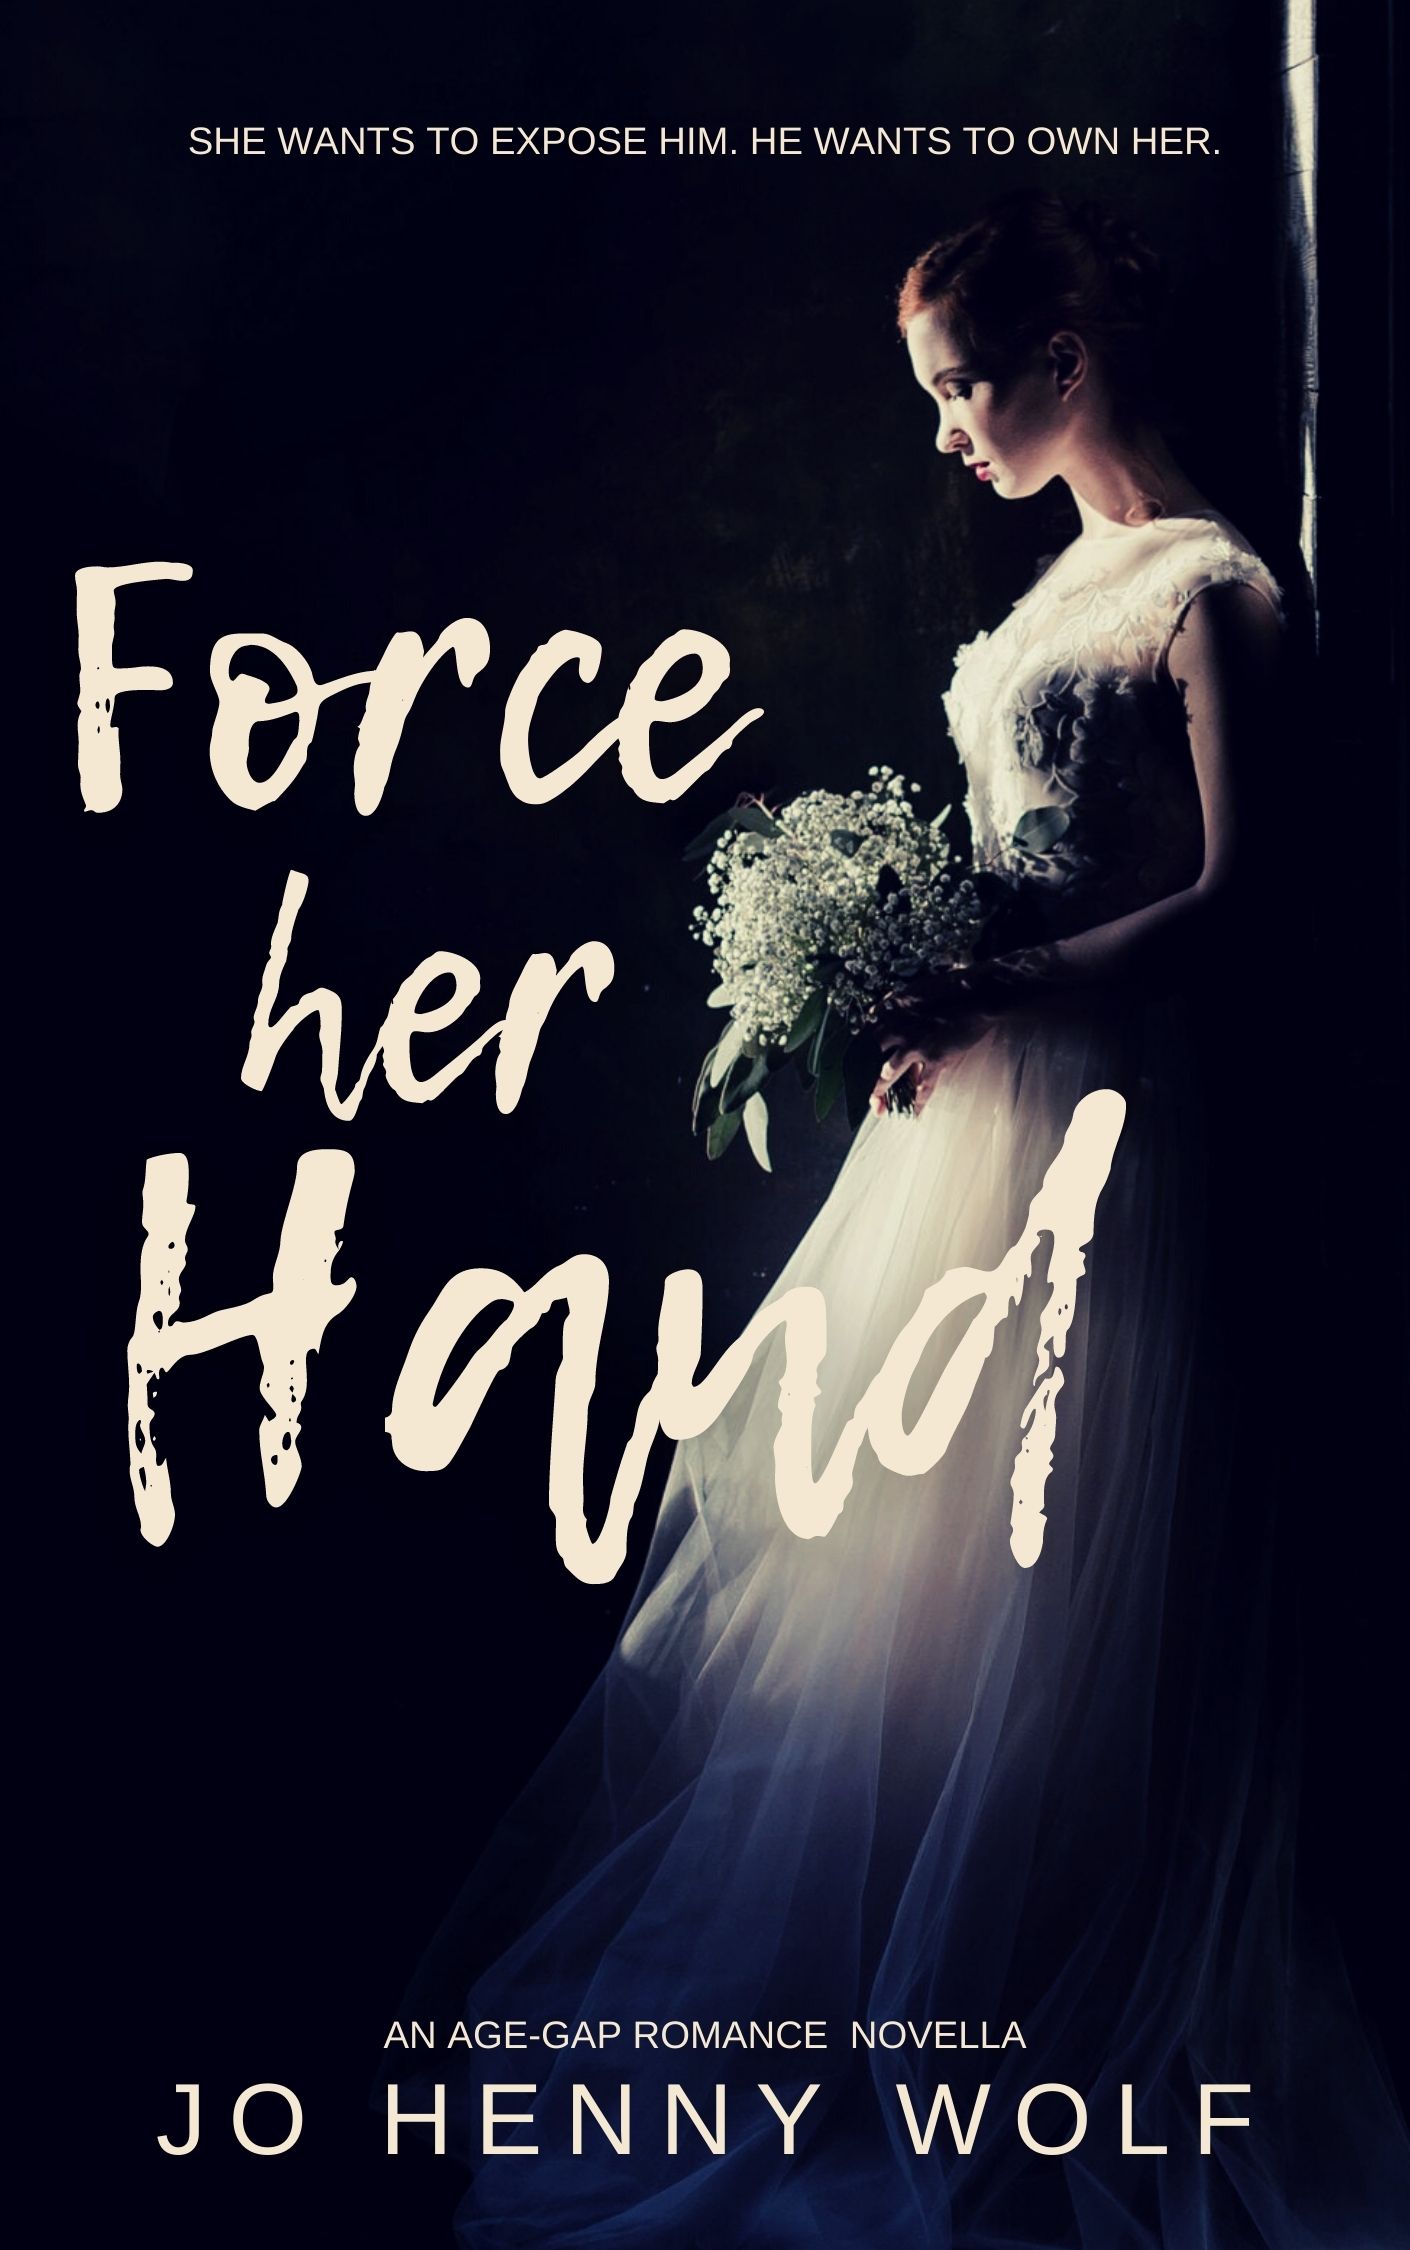 Cover of age-gap novella Force Her Hand by Jo Henny Wolf